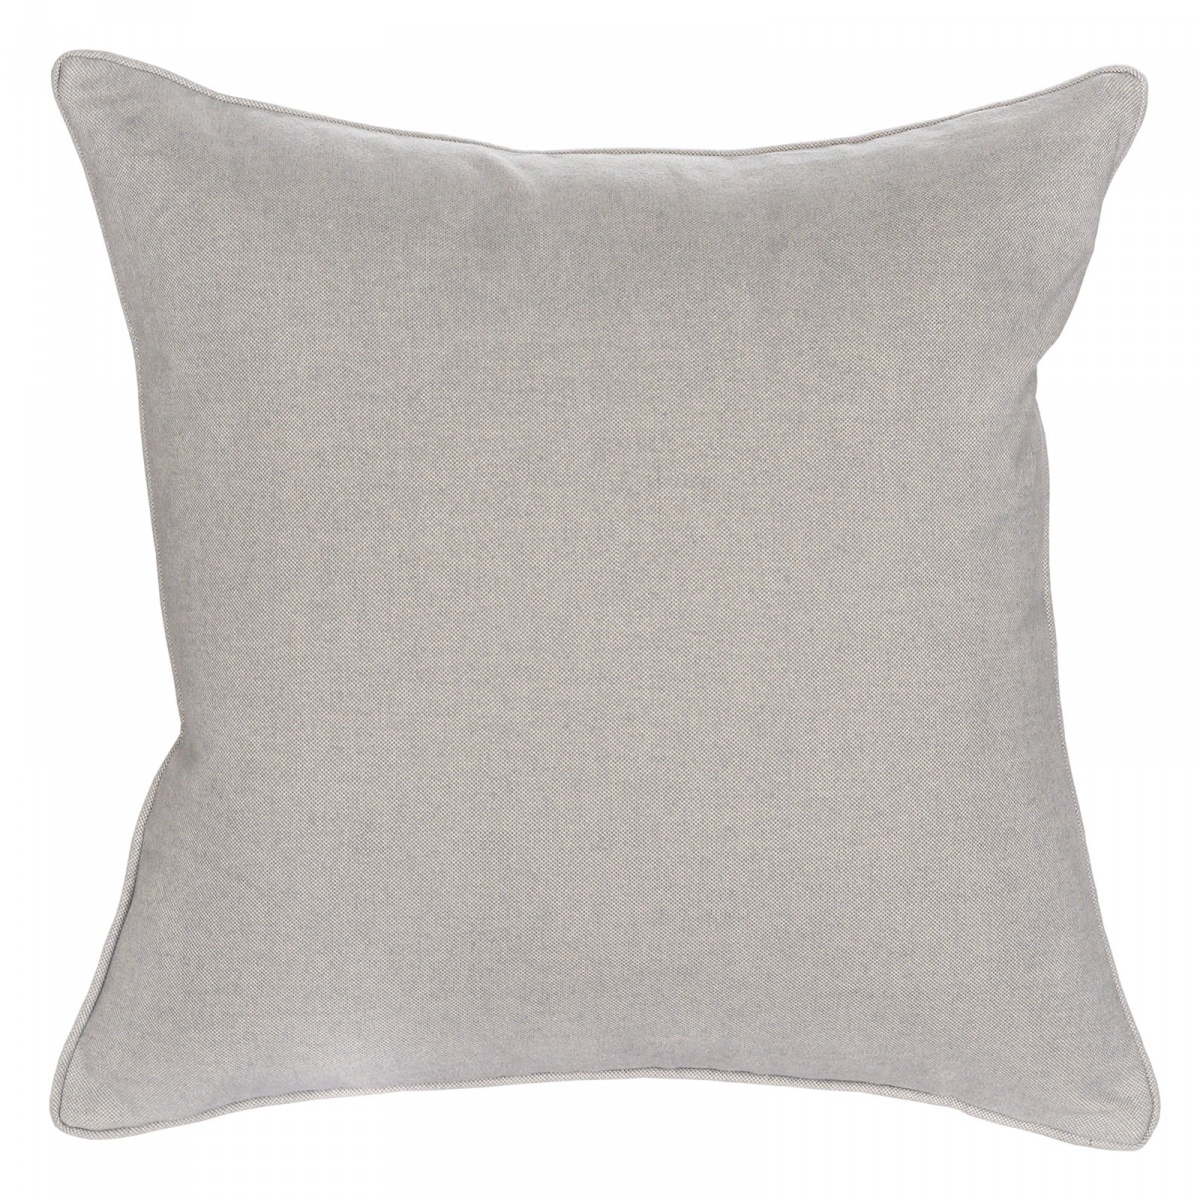 Papyrus Frost Cushion with Piping - 50x50cm